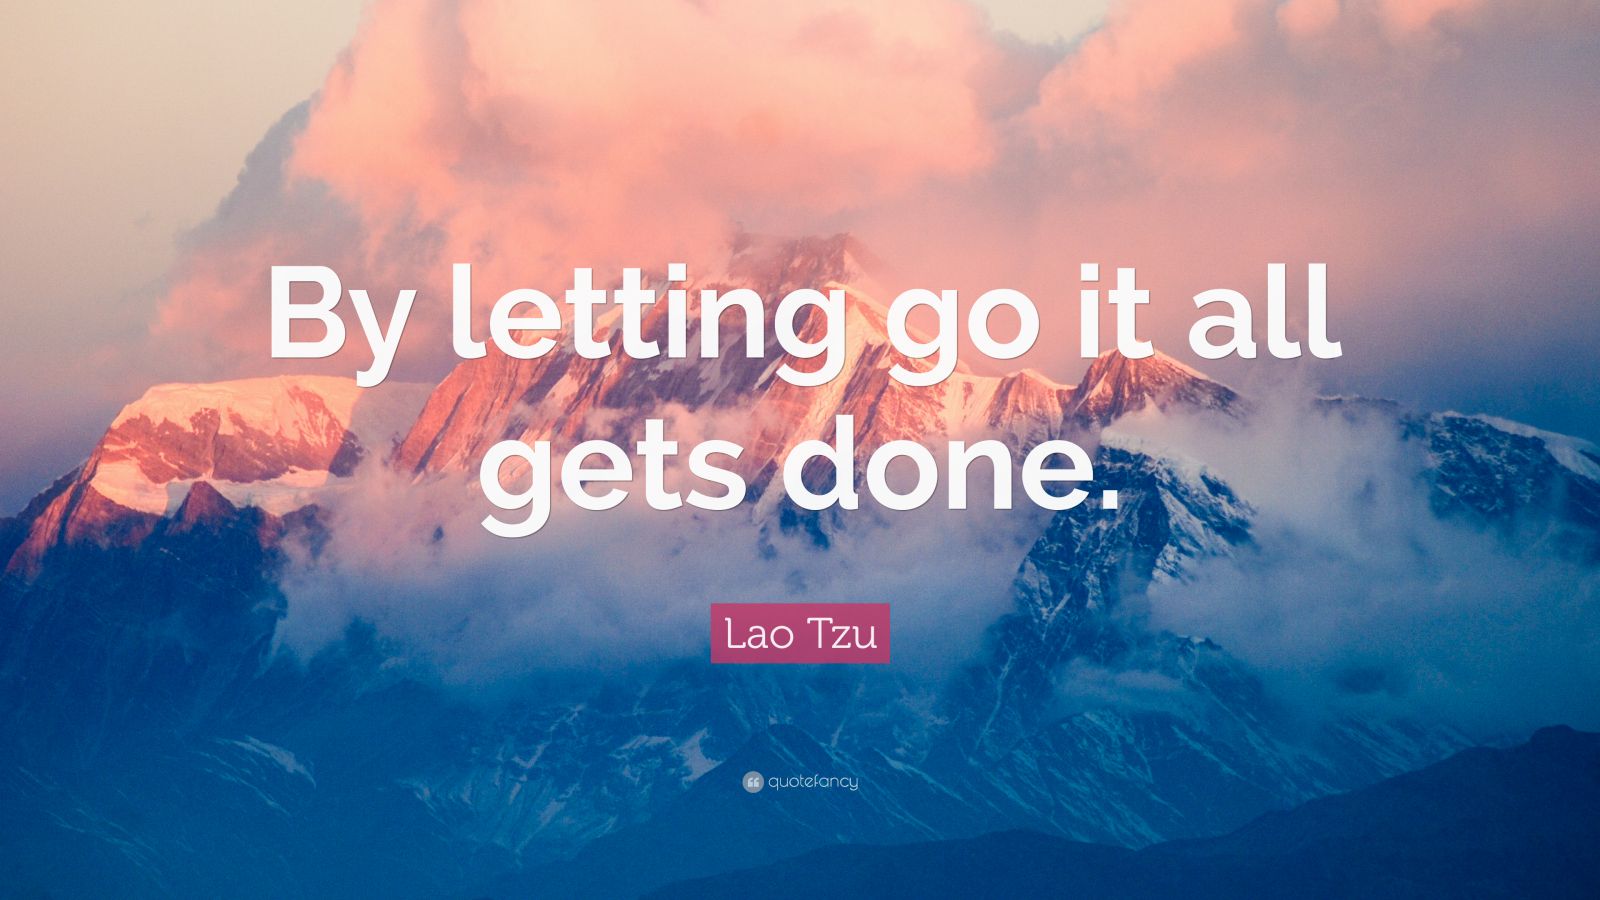 Lao Tzu Quote: “By letting go it all gets done.” (22 wallpapers ...